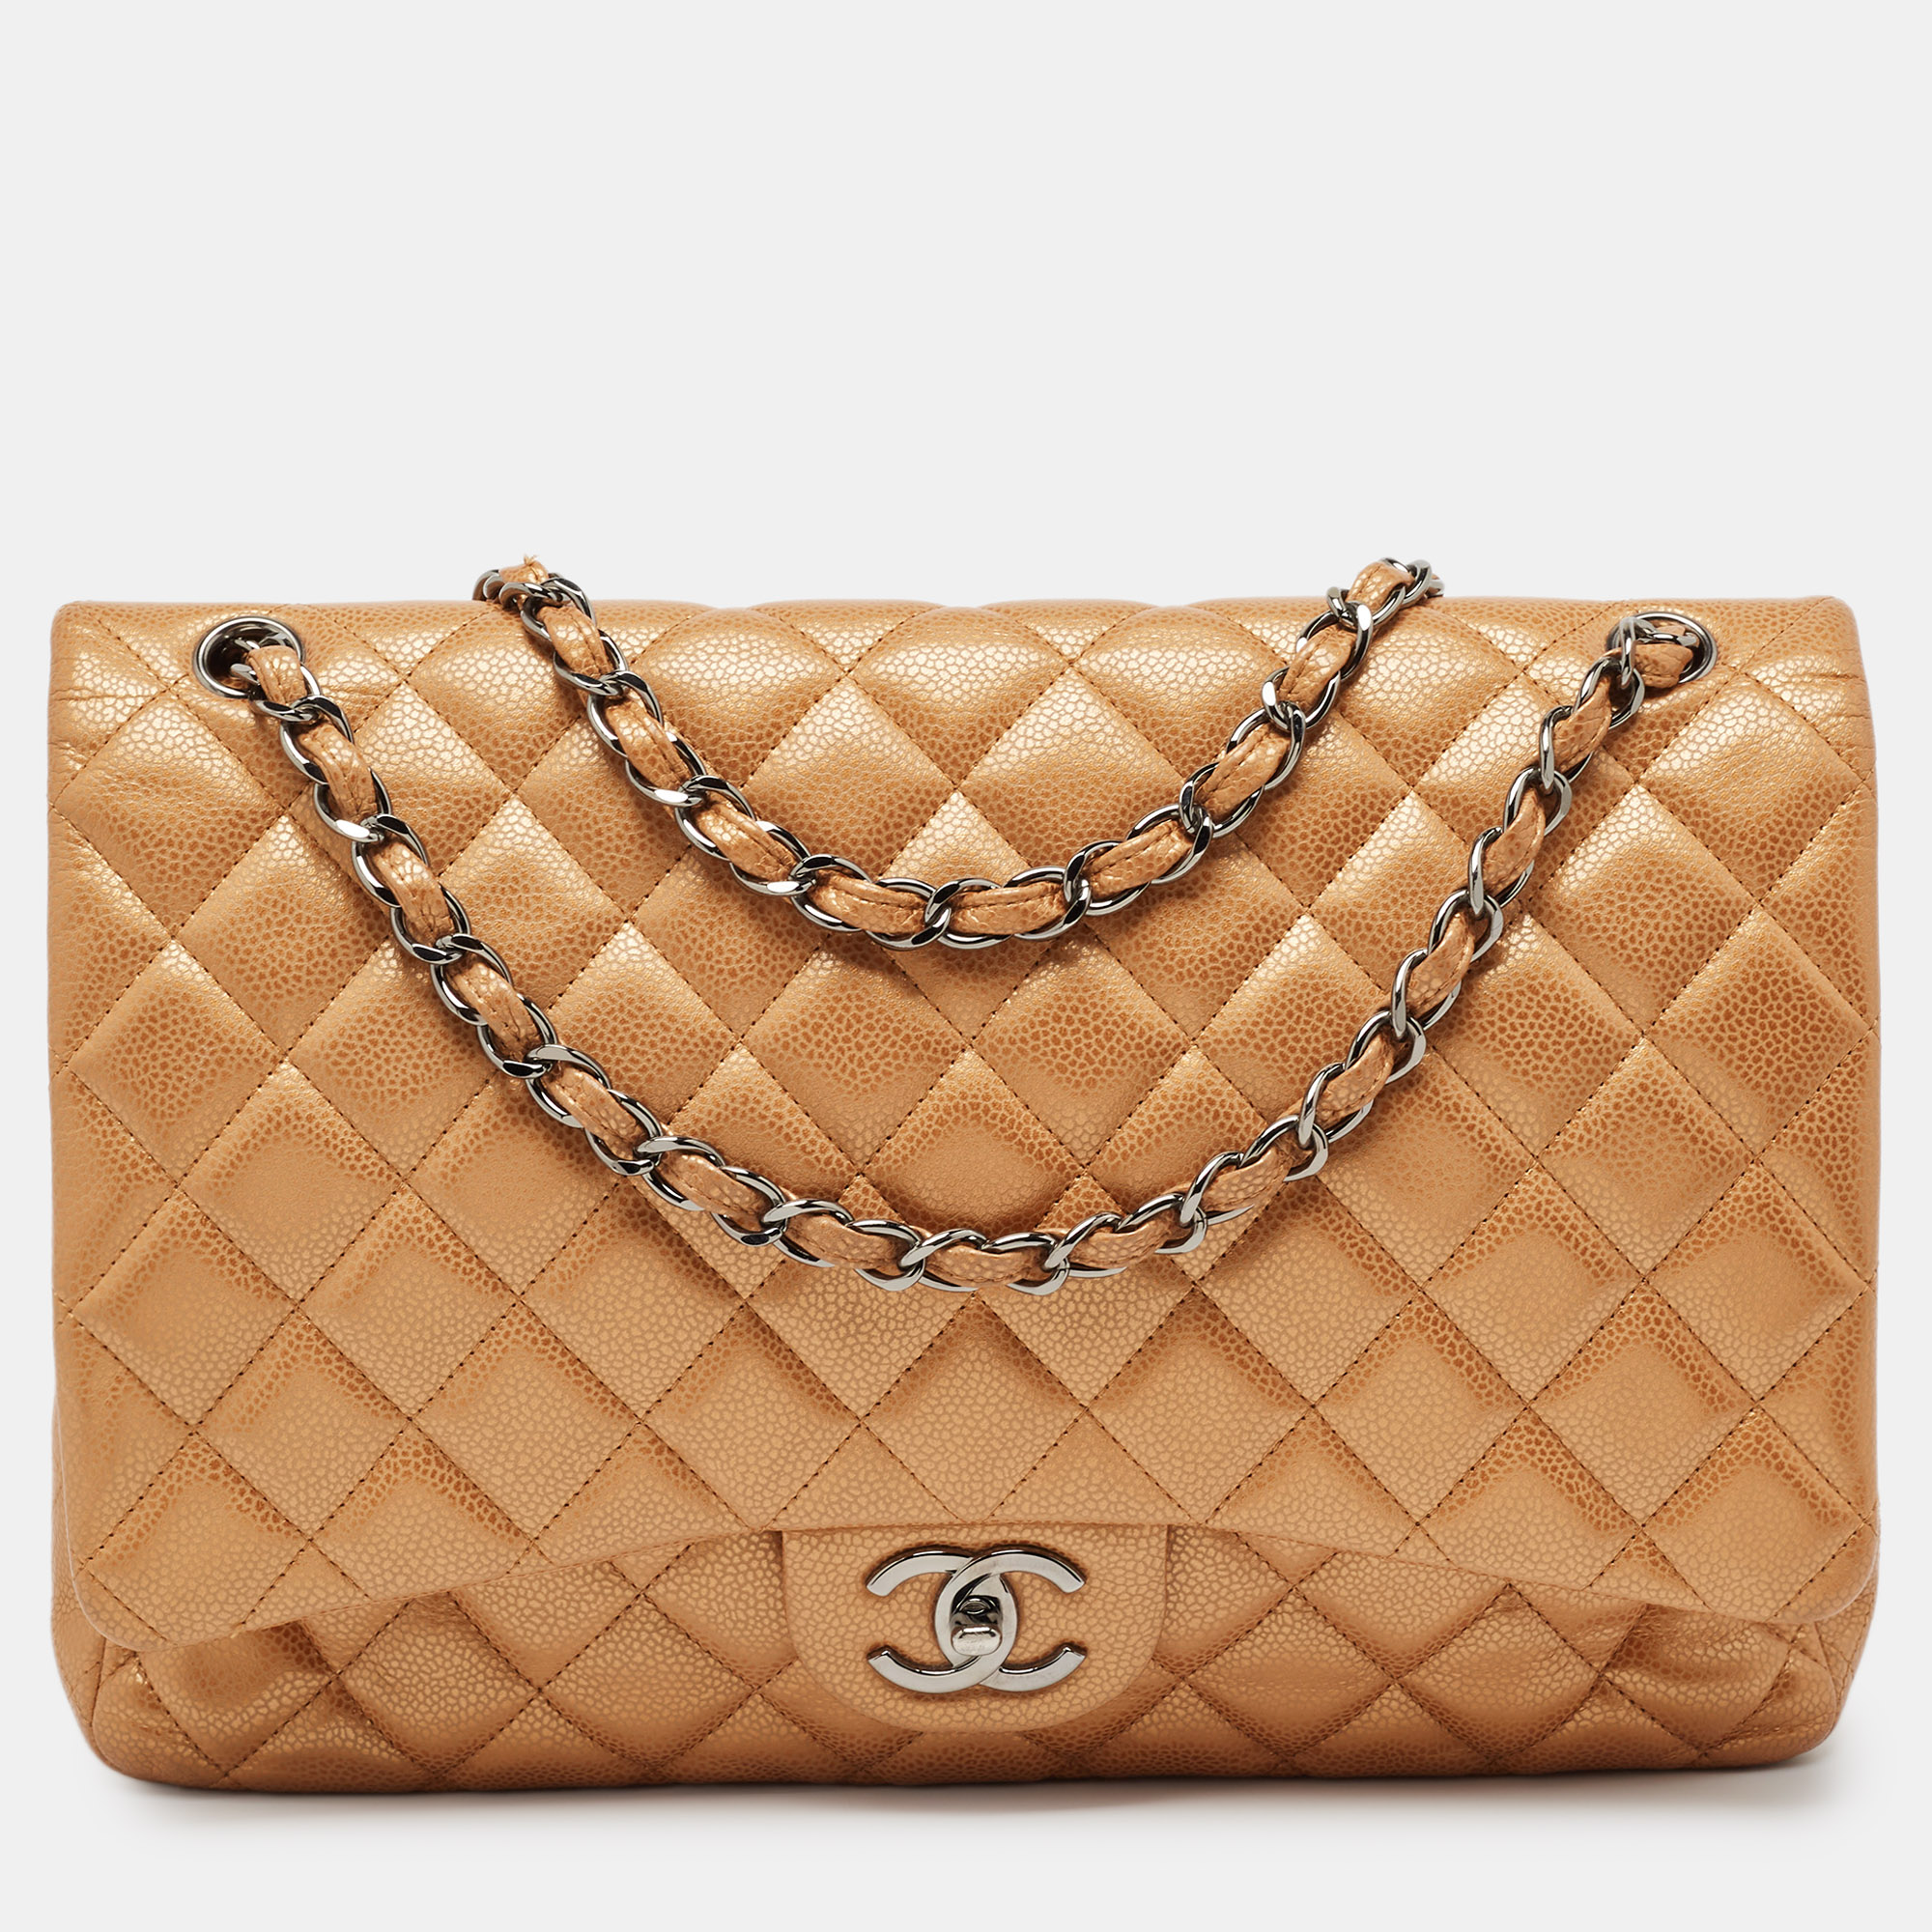 Chanel orange quilted caviar leather maxi classic double flap bag